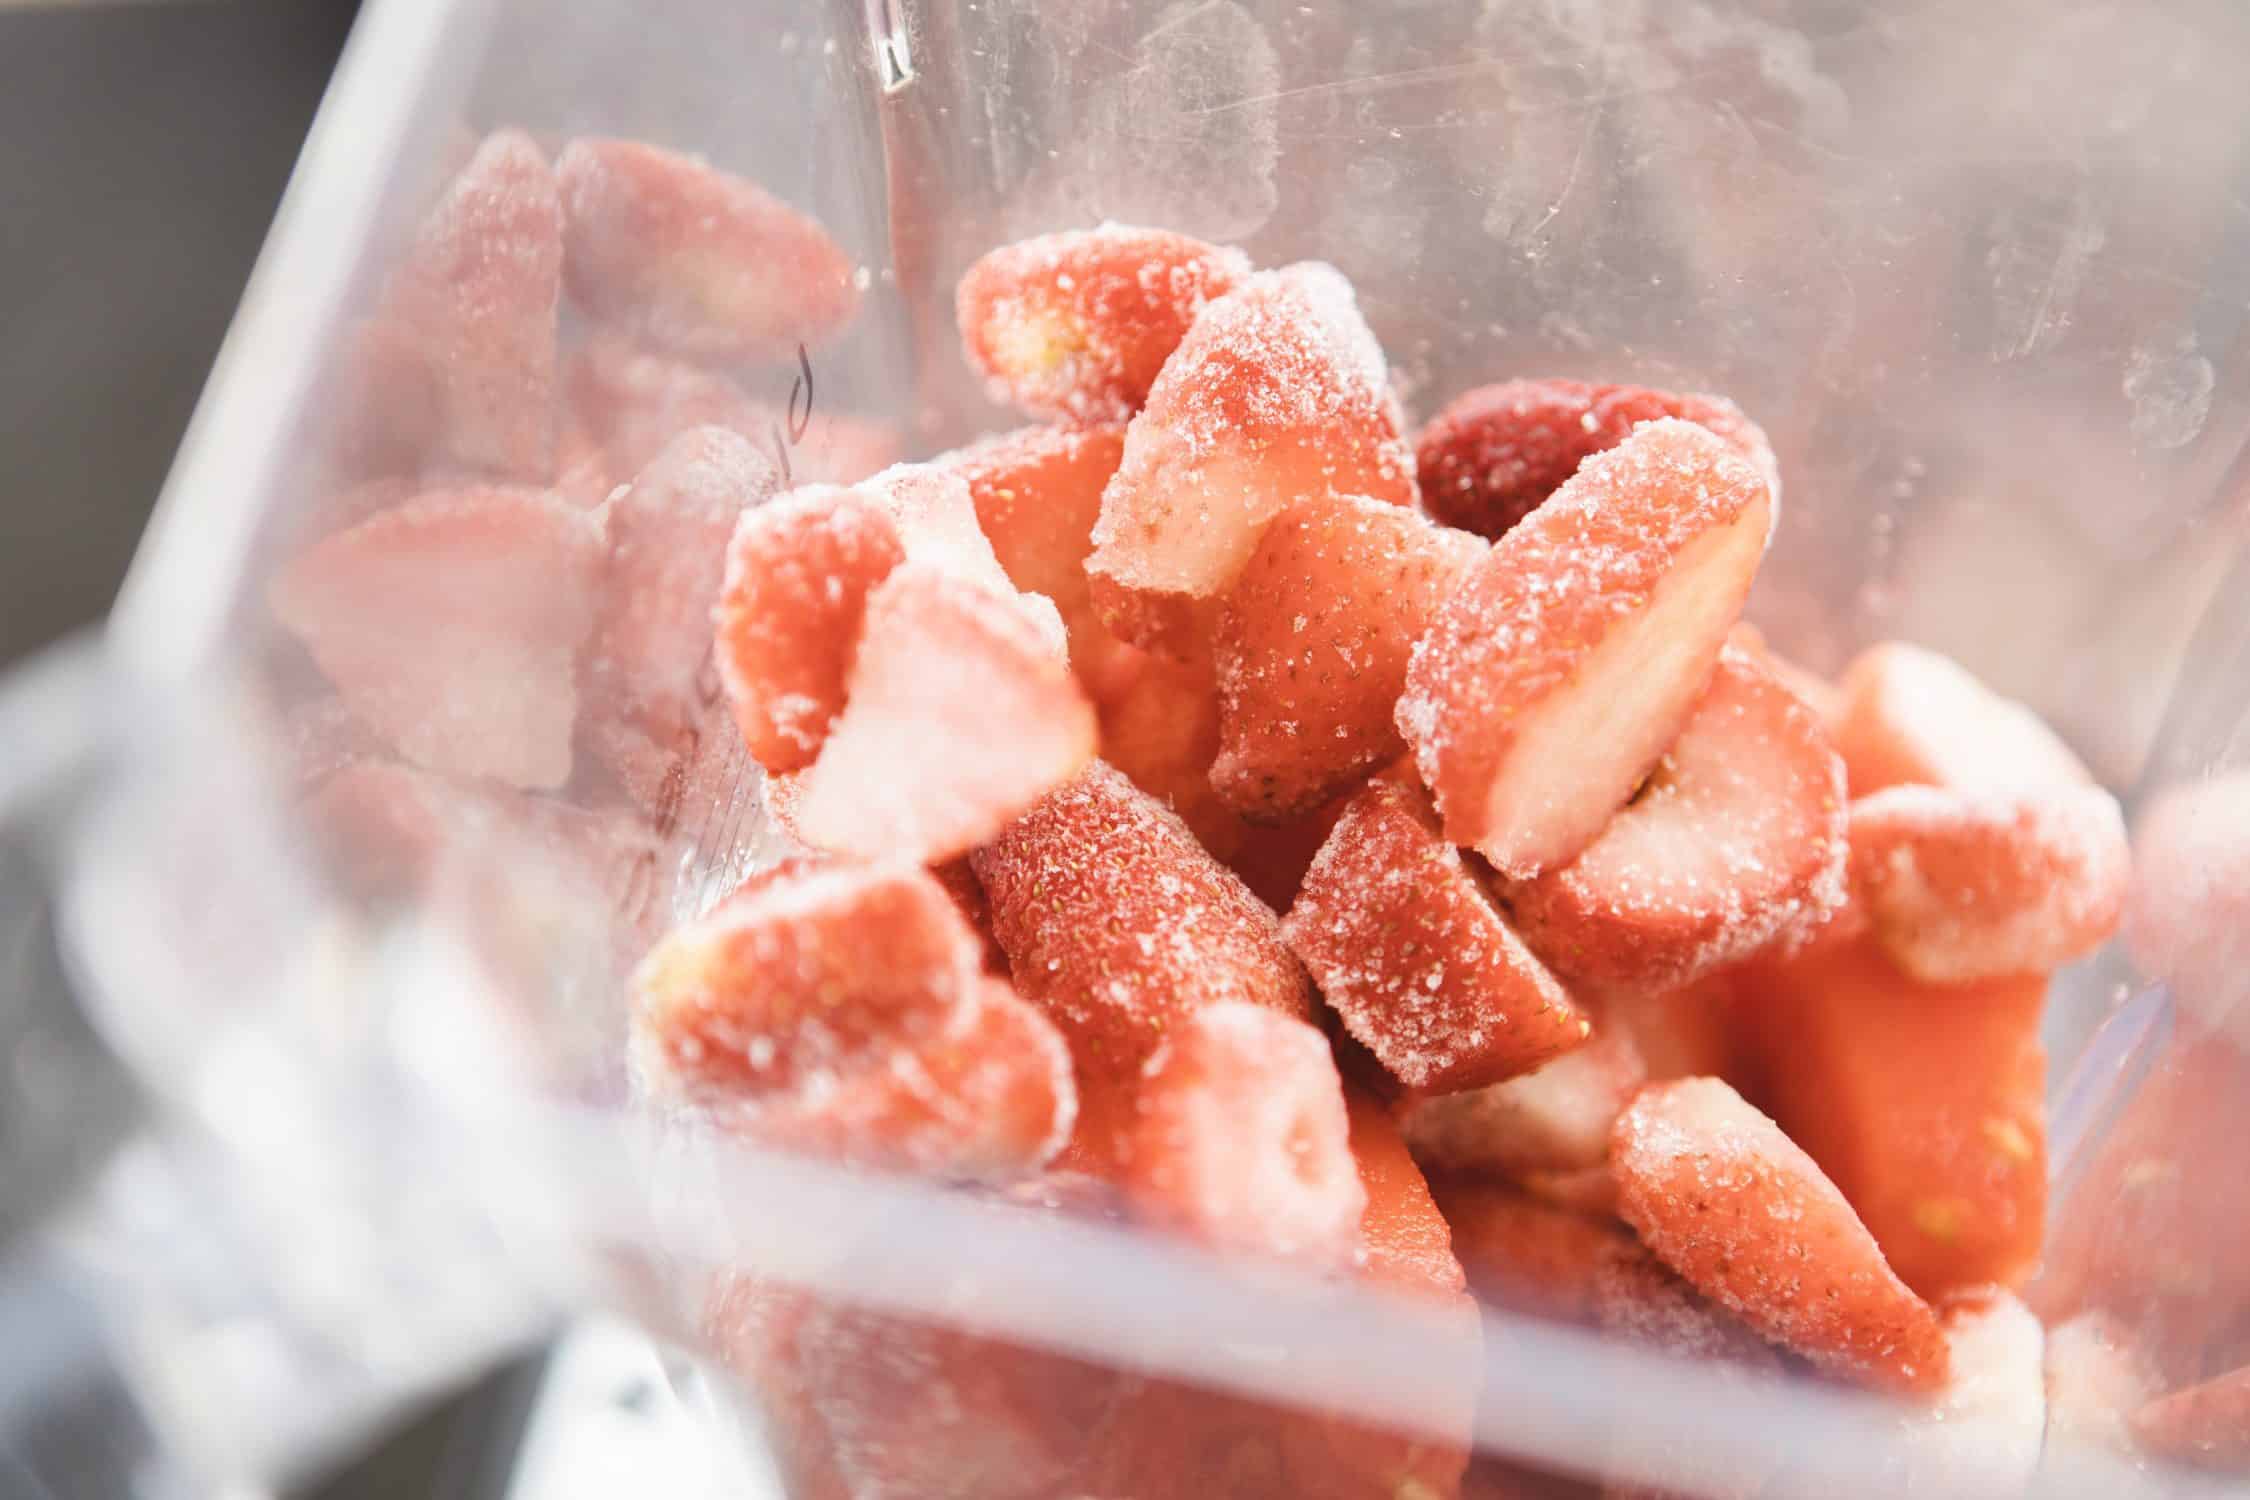 Looking down into the blender cup we see frozen strawberry chunks.